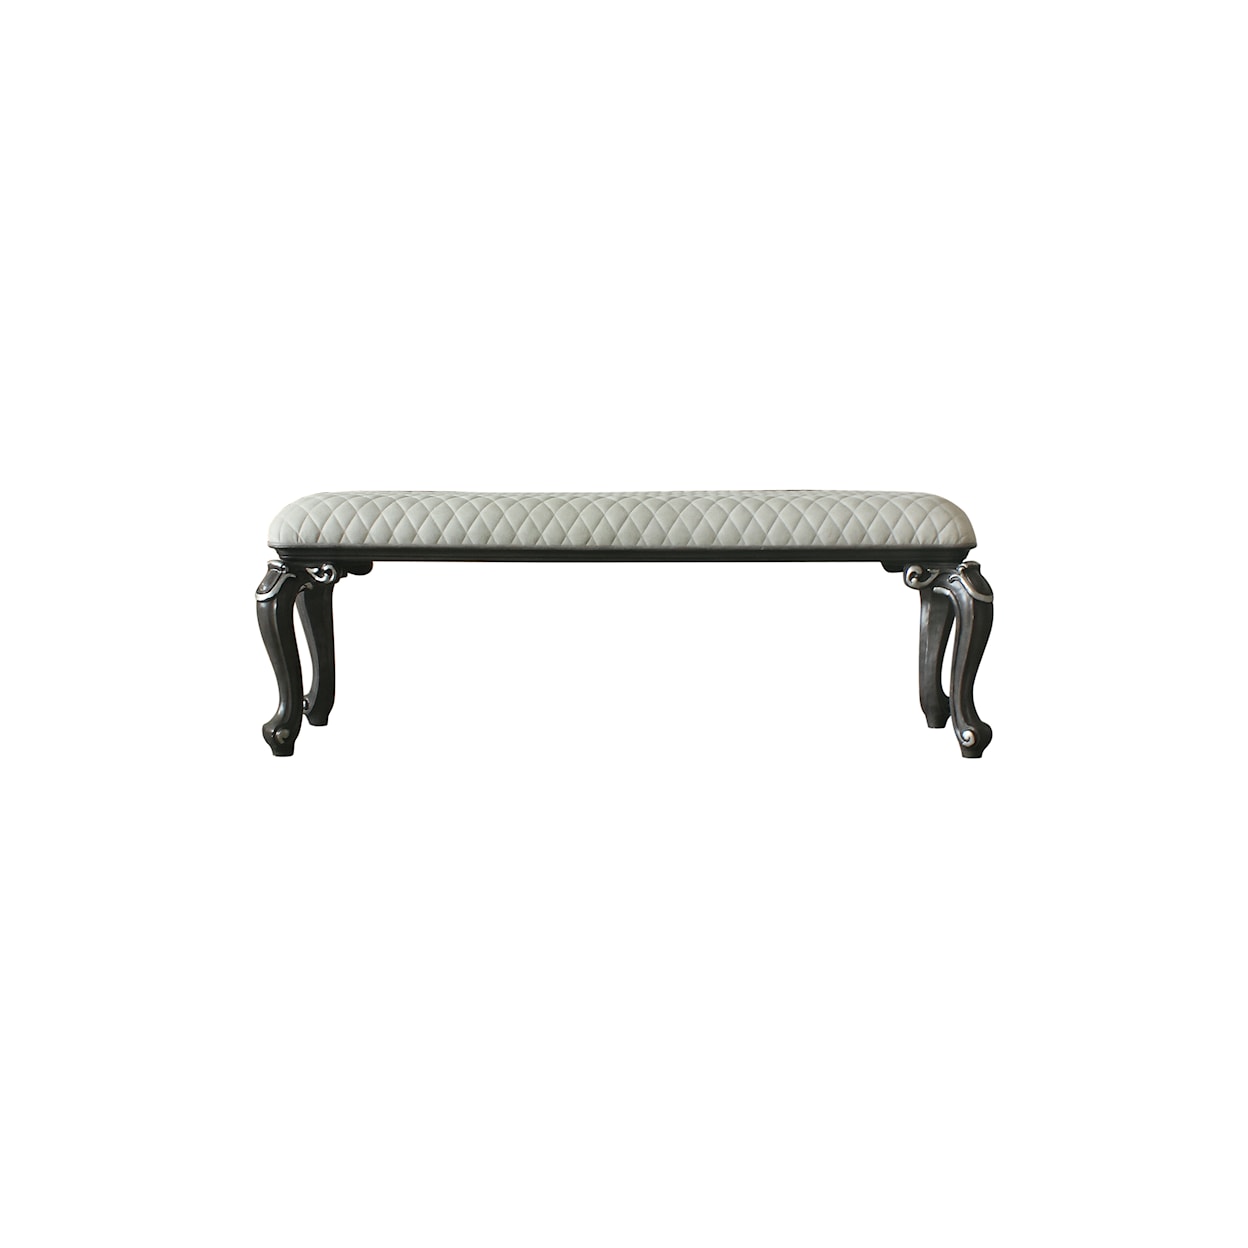 Acme Furniture House Delphine Bench